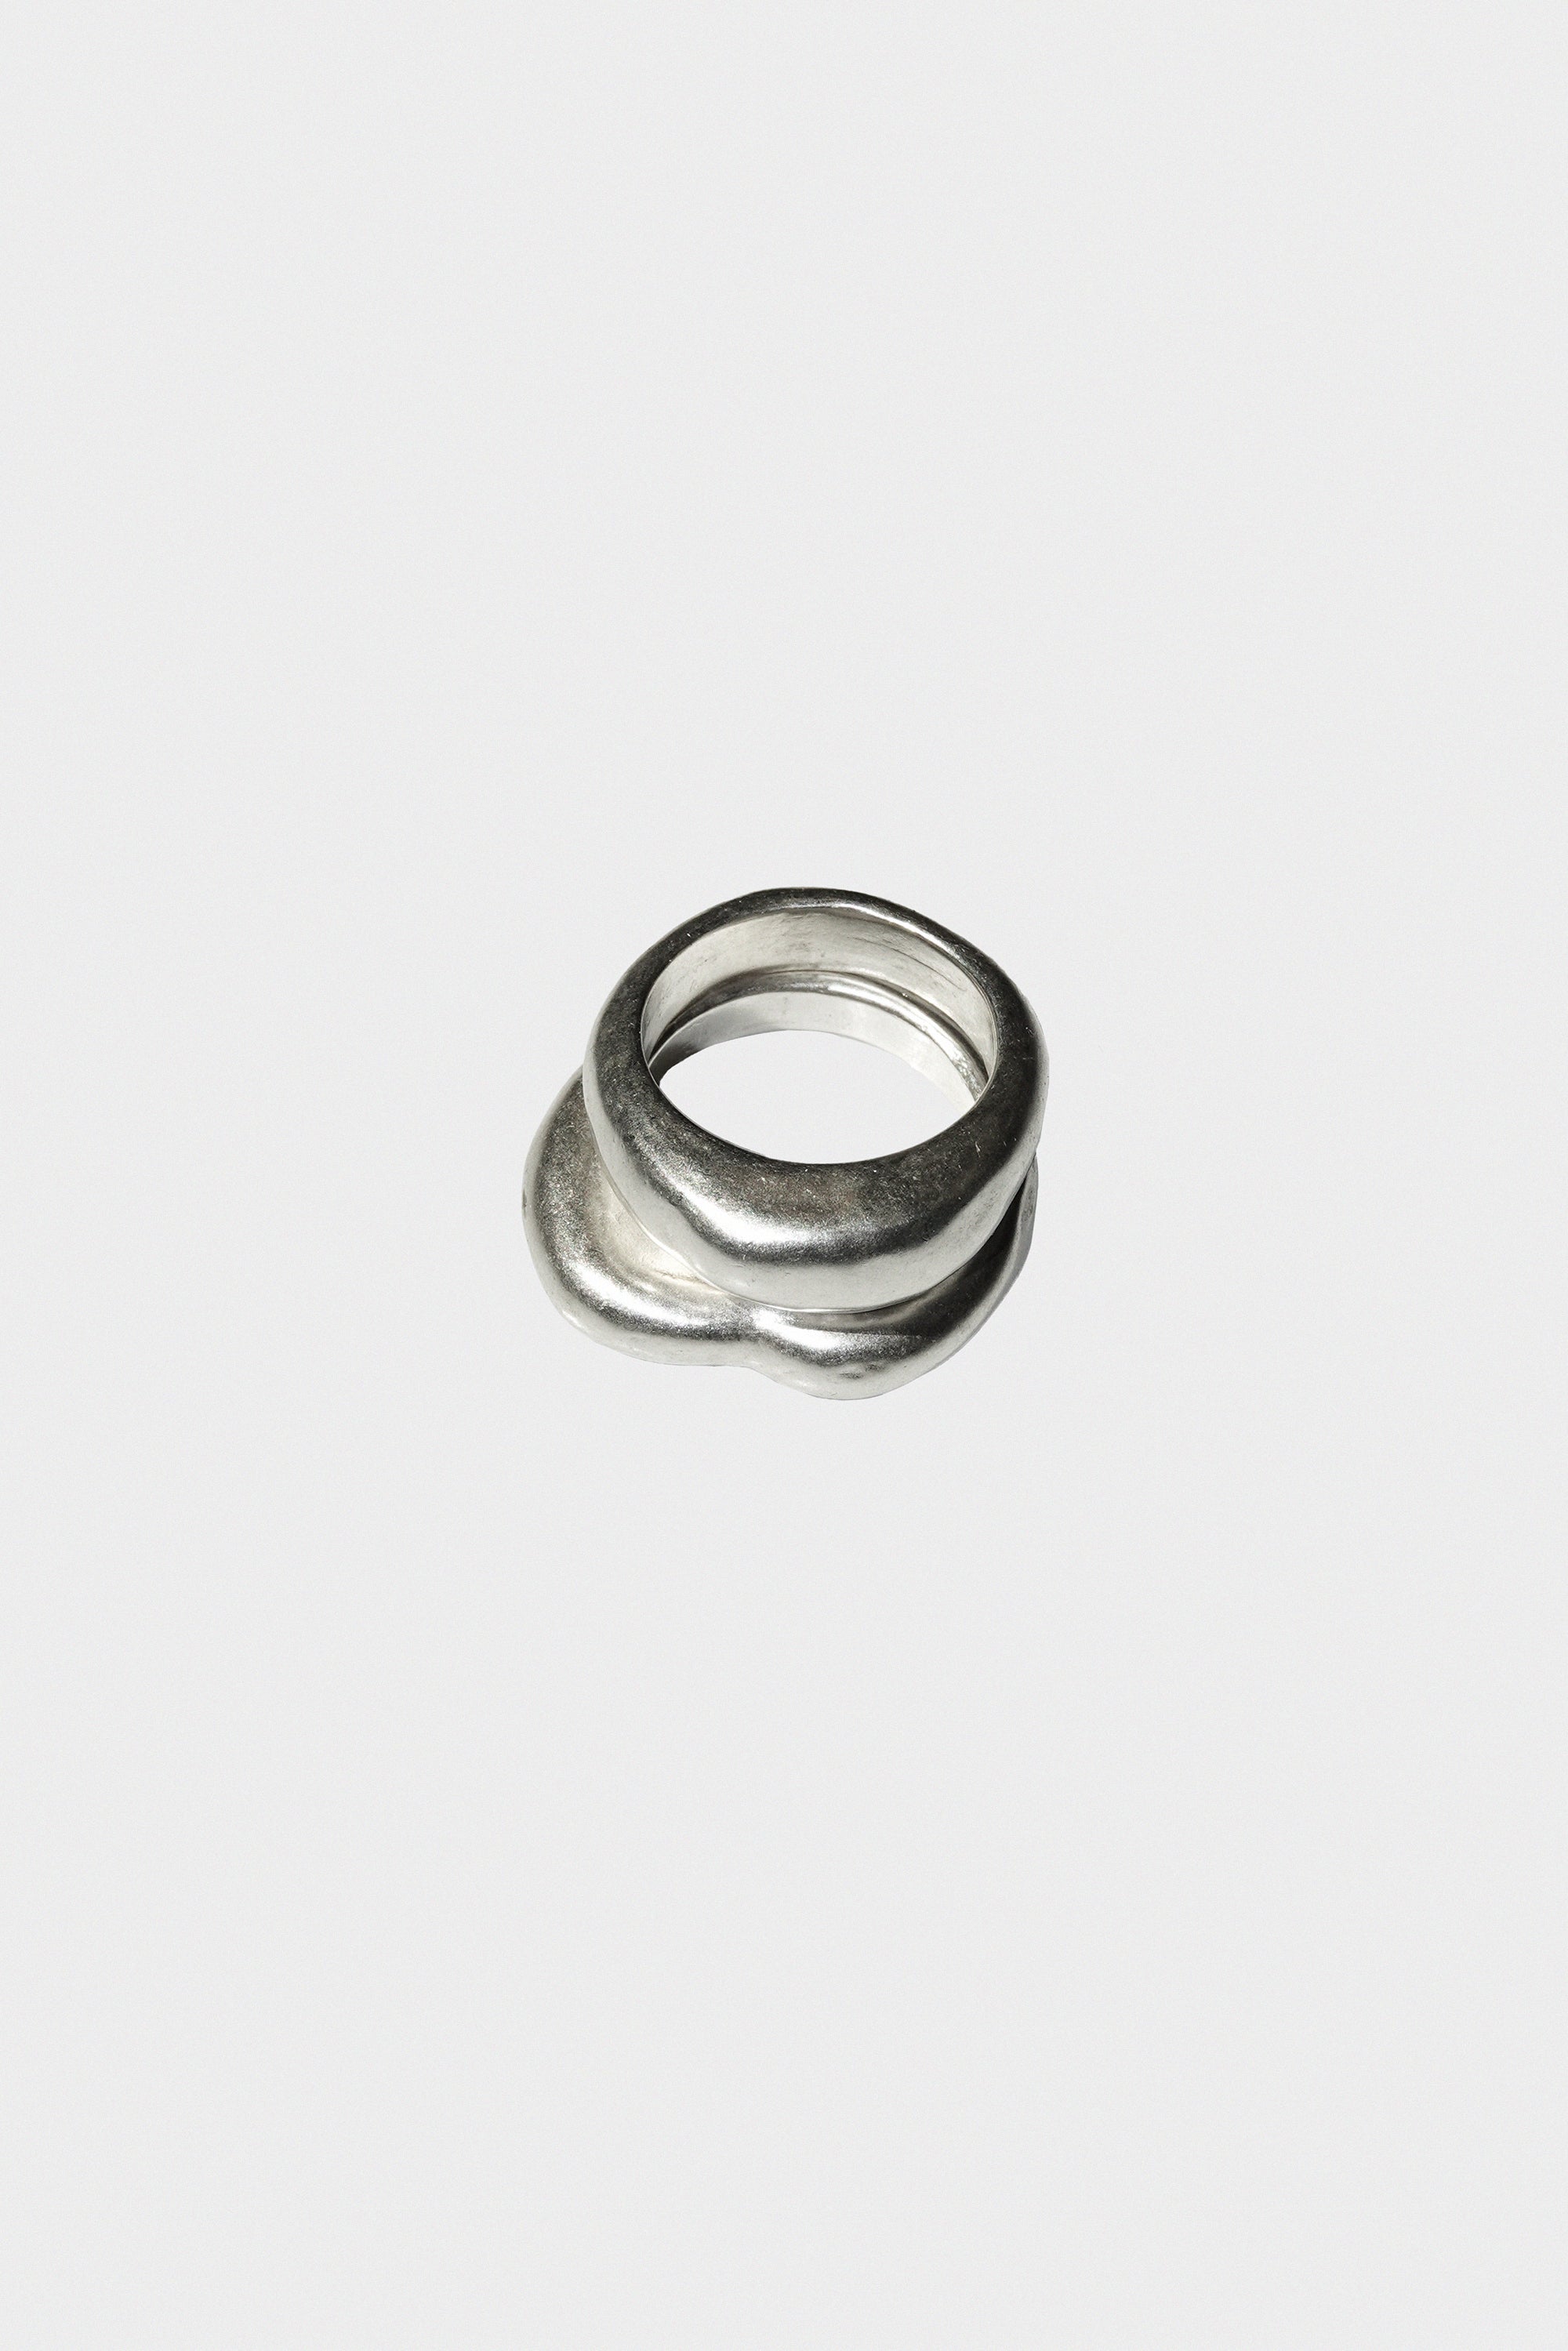 Cerrillos Stack in Sterling Silver by Oxbow